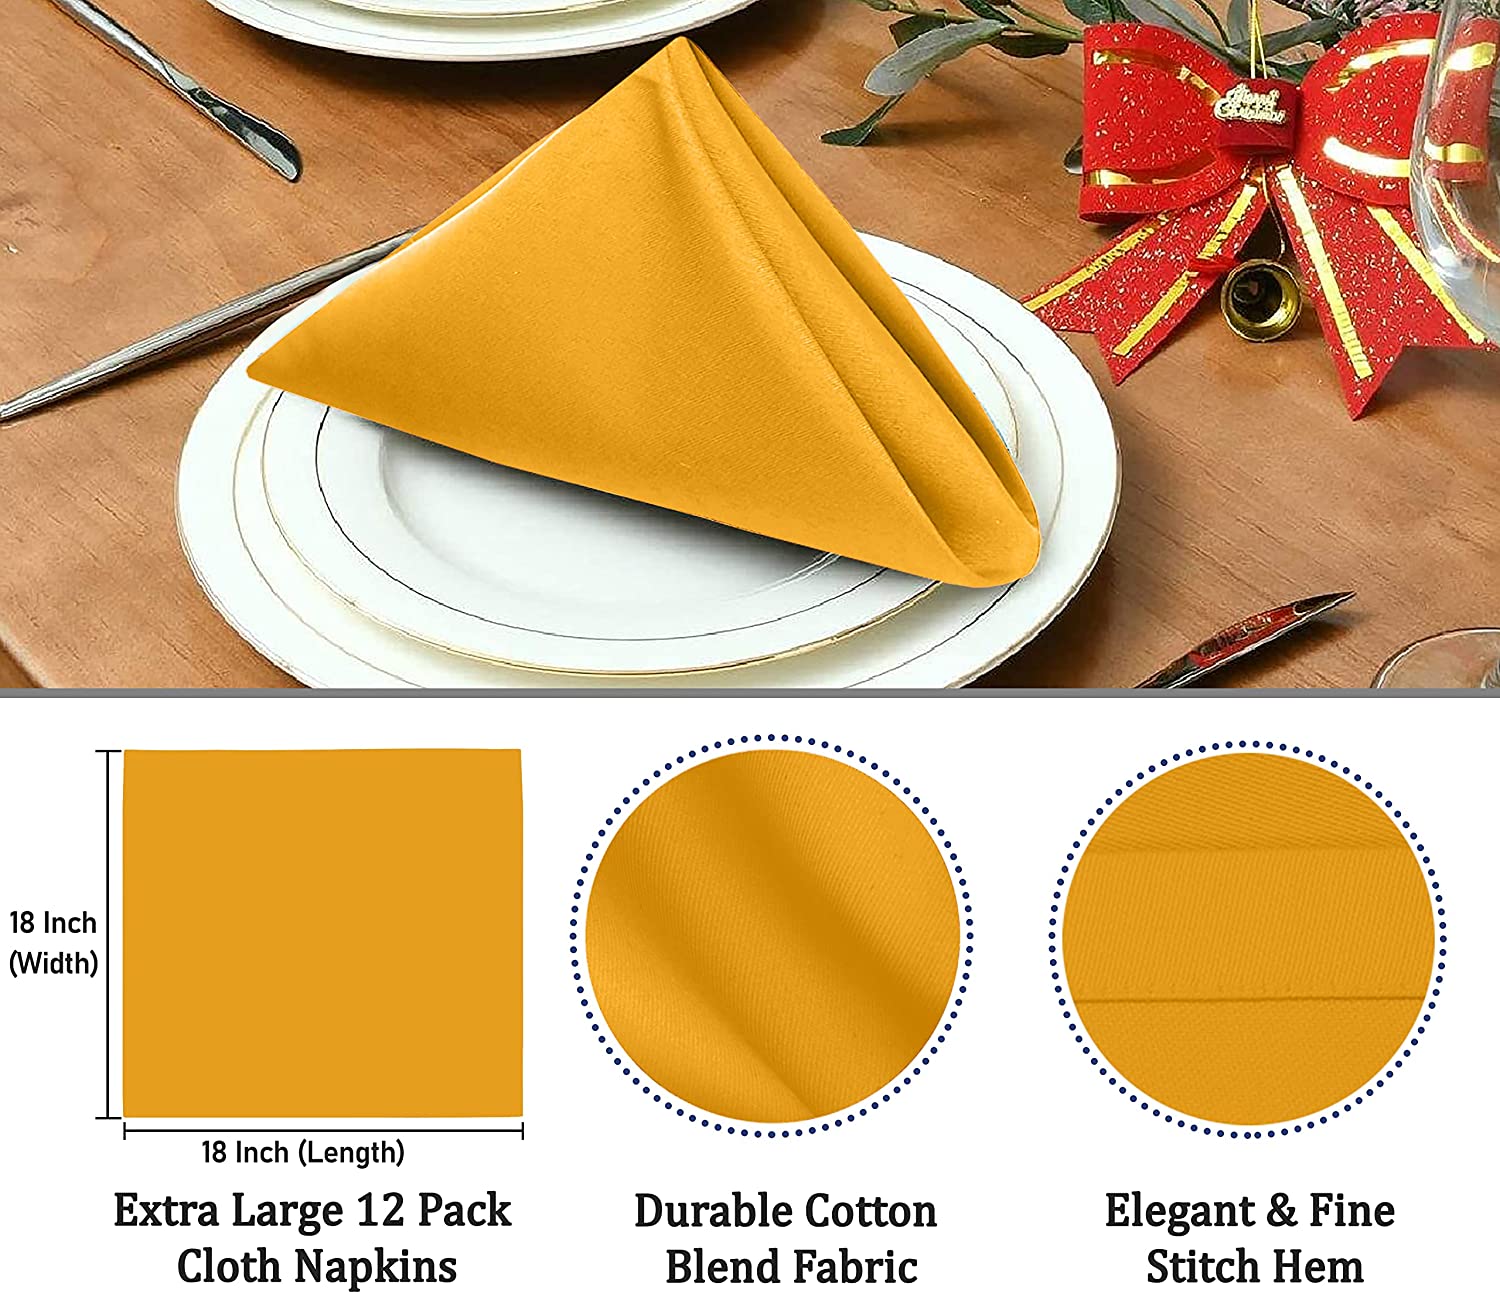 Ruvanti Cloth Napkins Set of 12, 18x18 inches Napkins Cloth Washable, Soft, Durable, Absorbent, Cotton Blend. Table Dinner Napkins Cloth for Hotel, Lunch, Restaurant, Wedding Event, Parties - Mustard - image 5 of 7